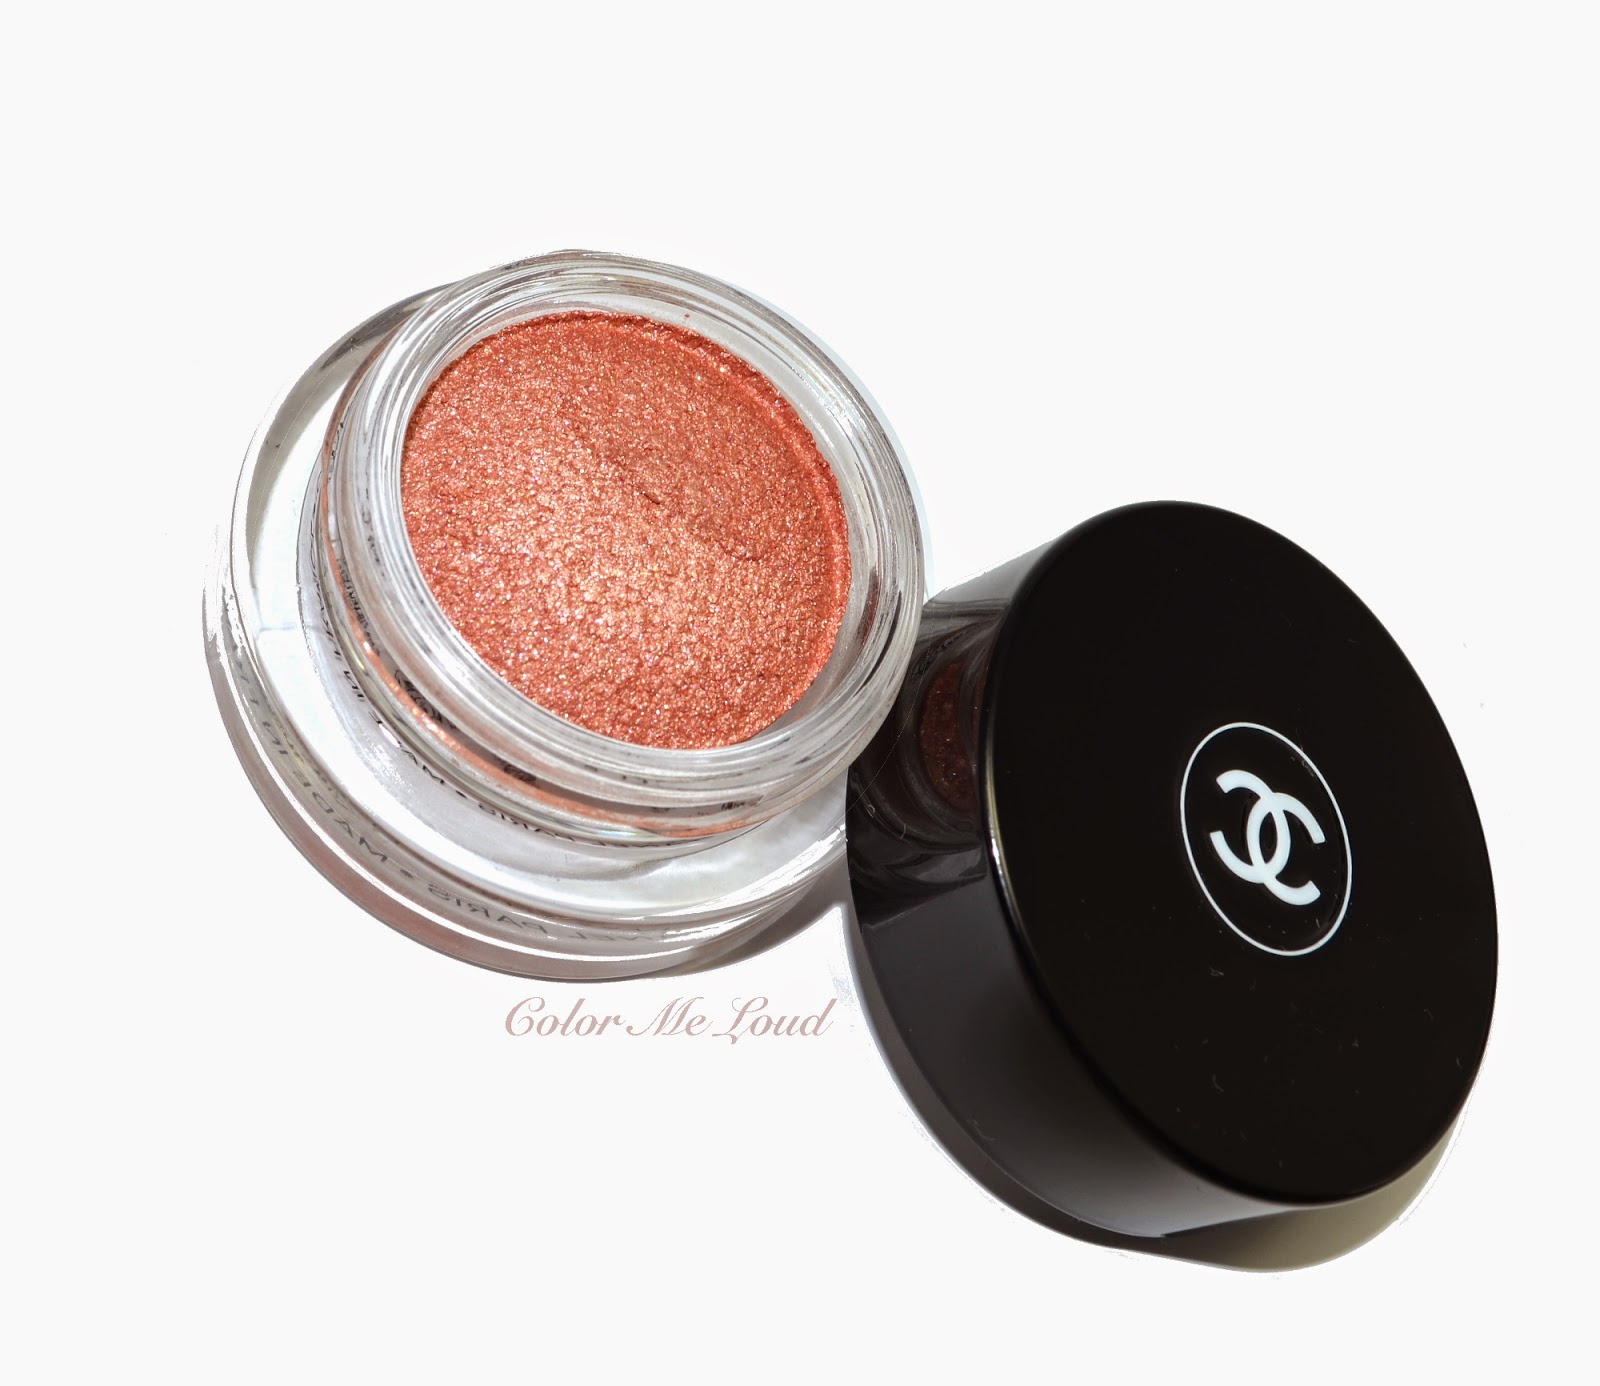 Chanel Illusion d'Ombre #847 Envol for Plumes Précieuses Holiday